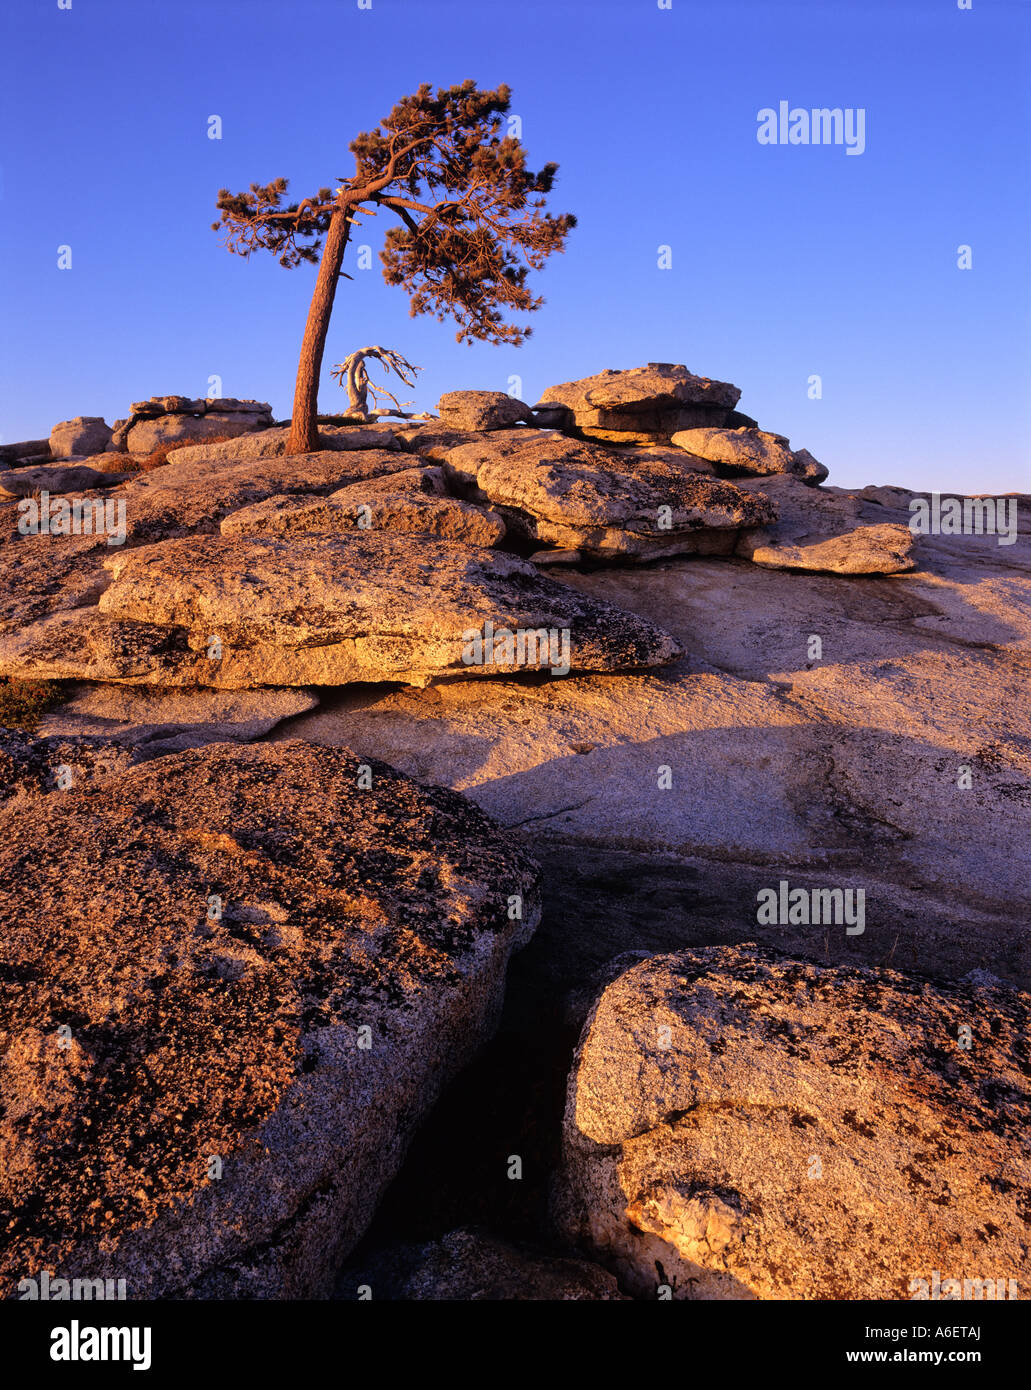 USA, California, Yosemite National Park, Sentinel Dome with exfoliating granite slabs and live and dead Jeffrey pine trees, late Stock Photo